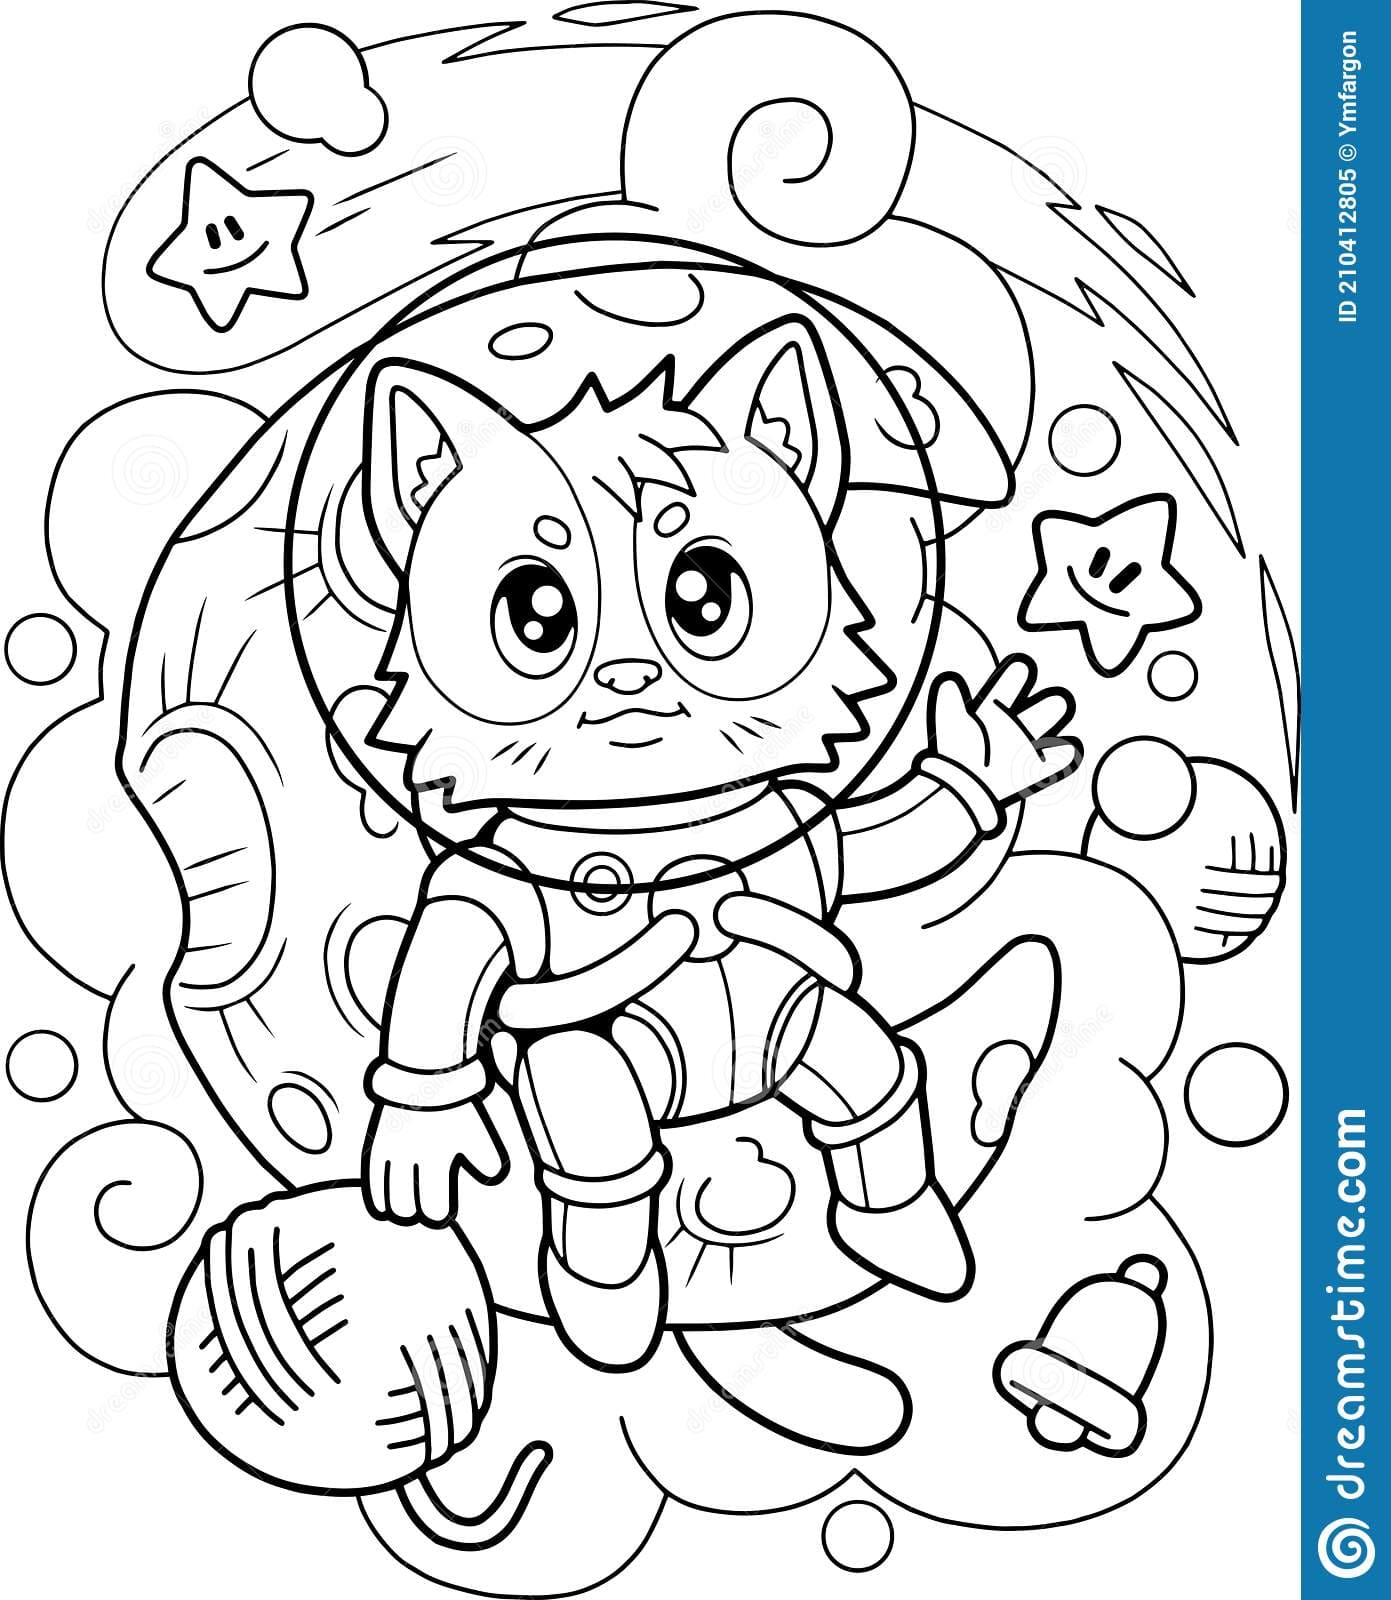 Cat Astronaut sitting on the moon Coloring Page